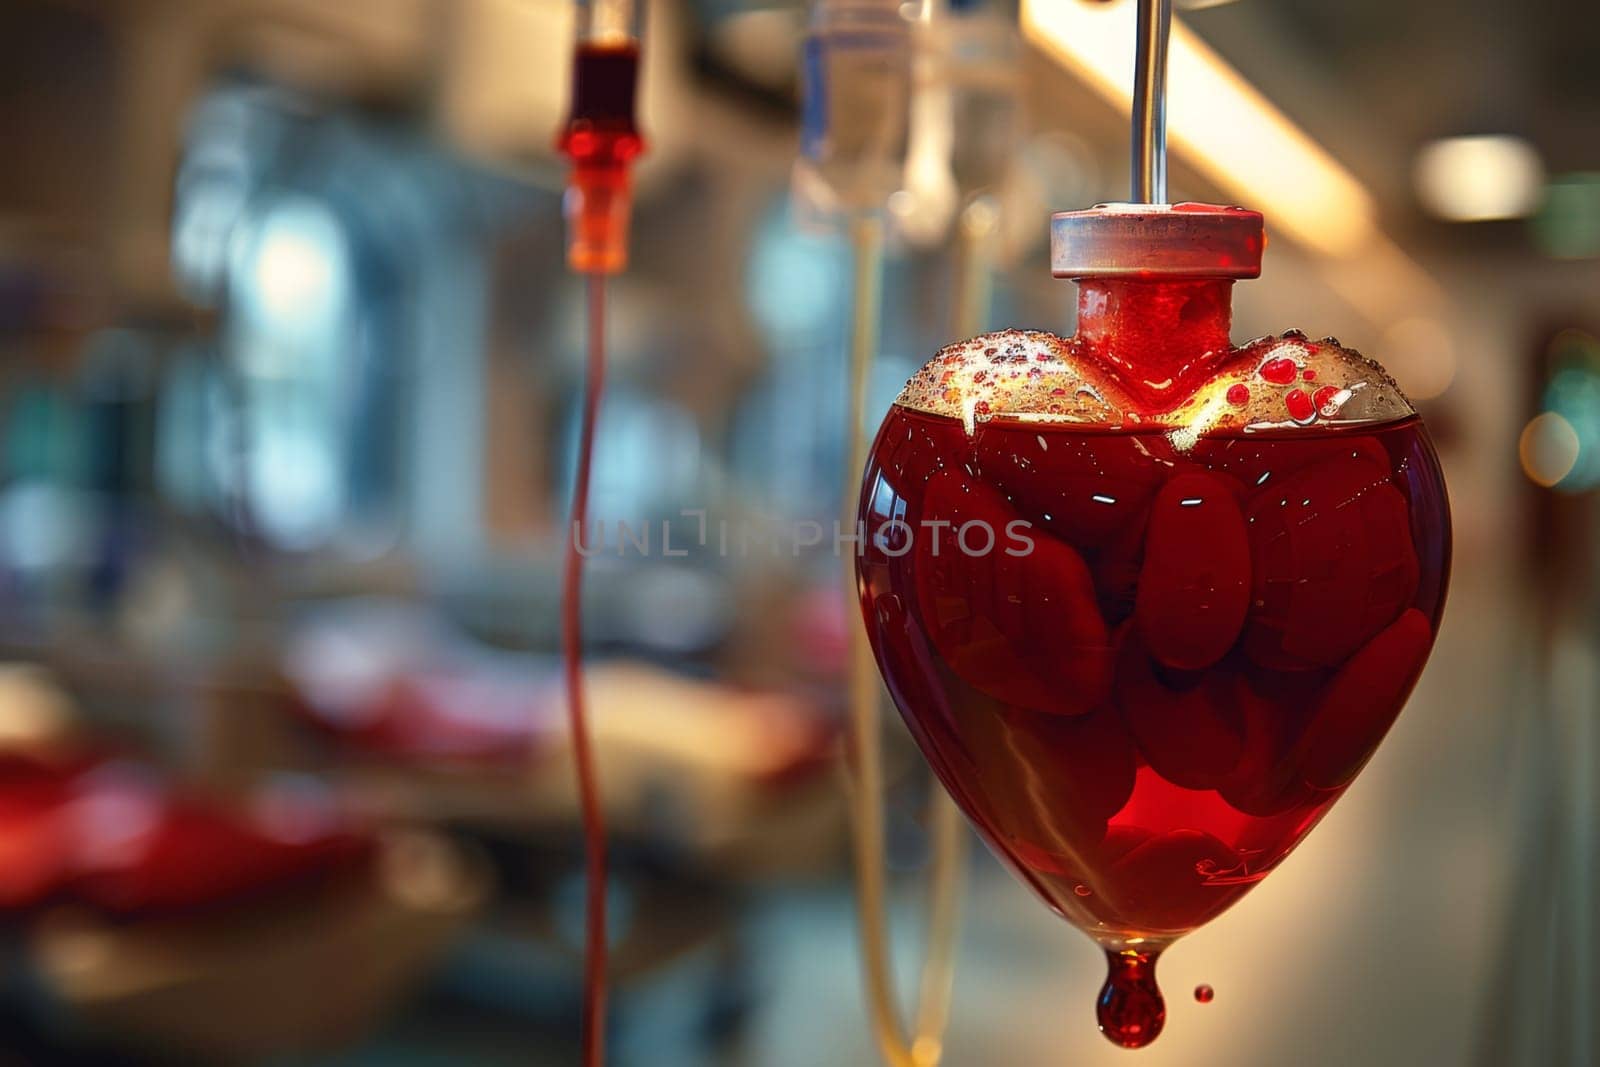 Every drop of blood counts. Drops of blood. The concept of World Blood Donor Day.